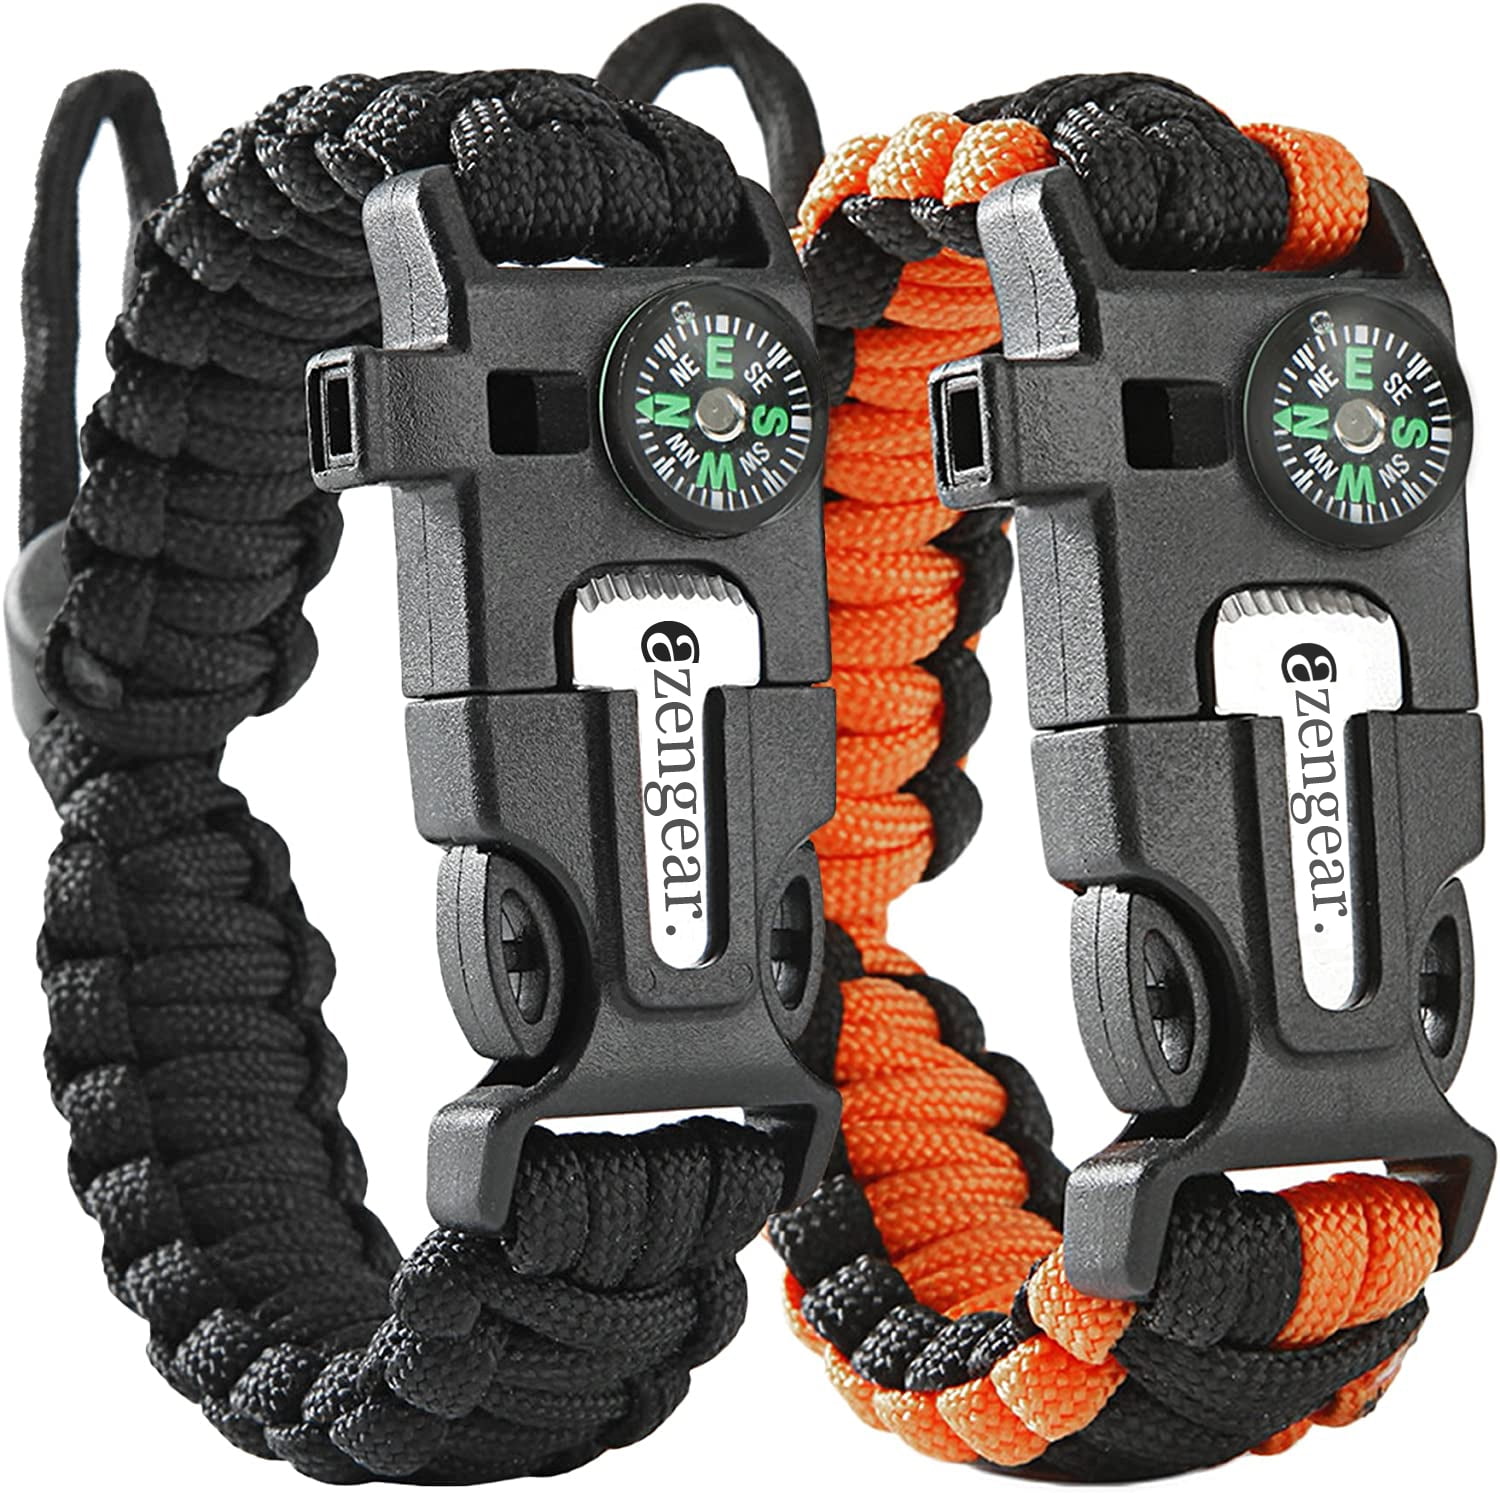 Outdoor-Survival Paracord Armband Feuerstein Feuer Starter Whistle Kompass GearY 